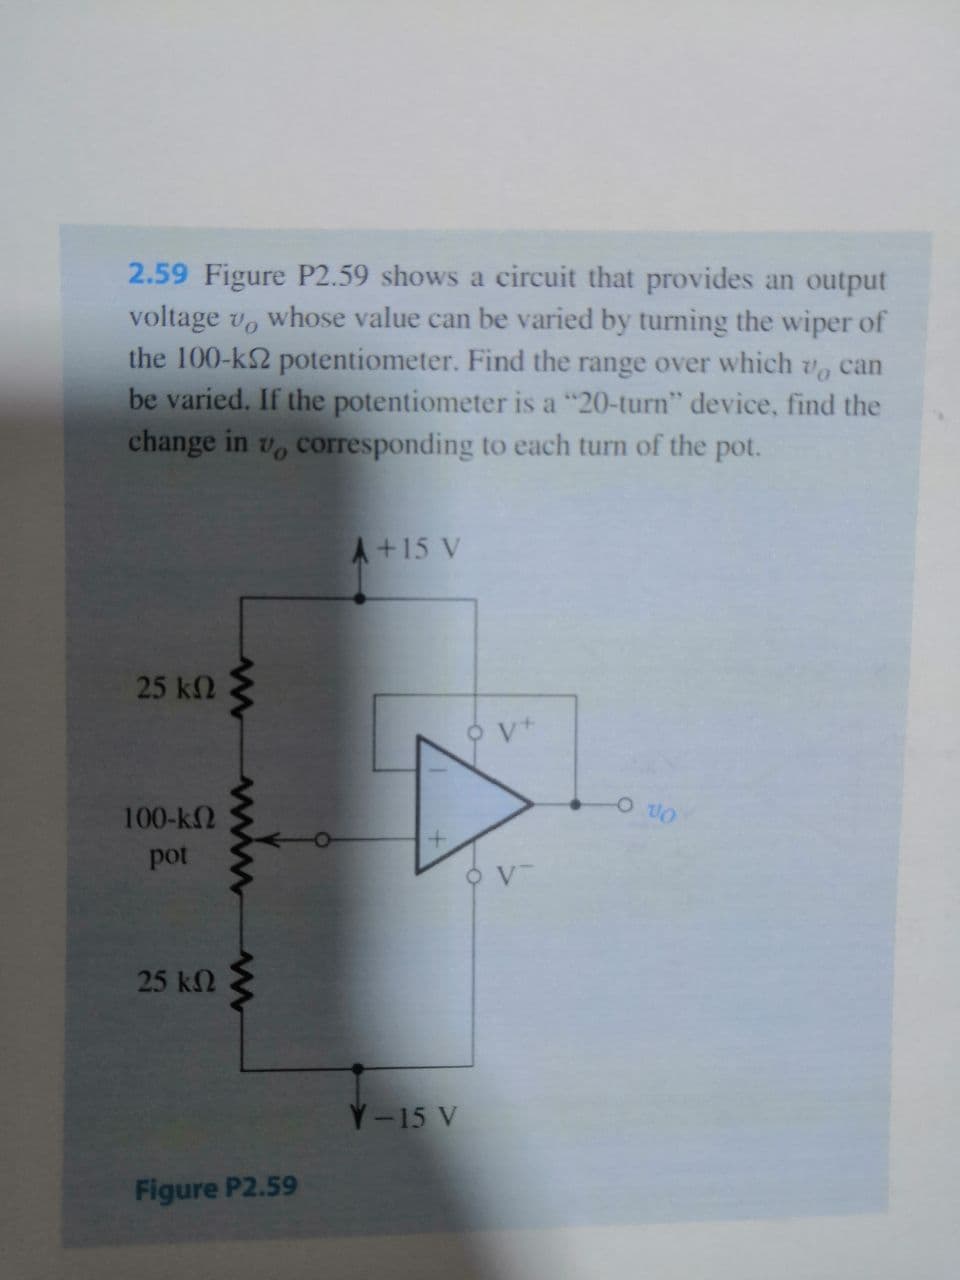 2.59 Figure P2.59 shows a circuit that provides an output
voltage vo
whose value can be varied by turning the wiper of
the 100-k2 potentiometer. Find the range over which
be varied. If the potentiometer is a "20-turn" device, find the
change in v, corresponding to each turn of the pot.
can
A+15 V
25 k2
100-k2
pot
25 k2
Y-15 V
Figure P2.59
ww
